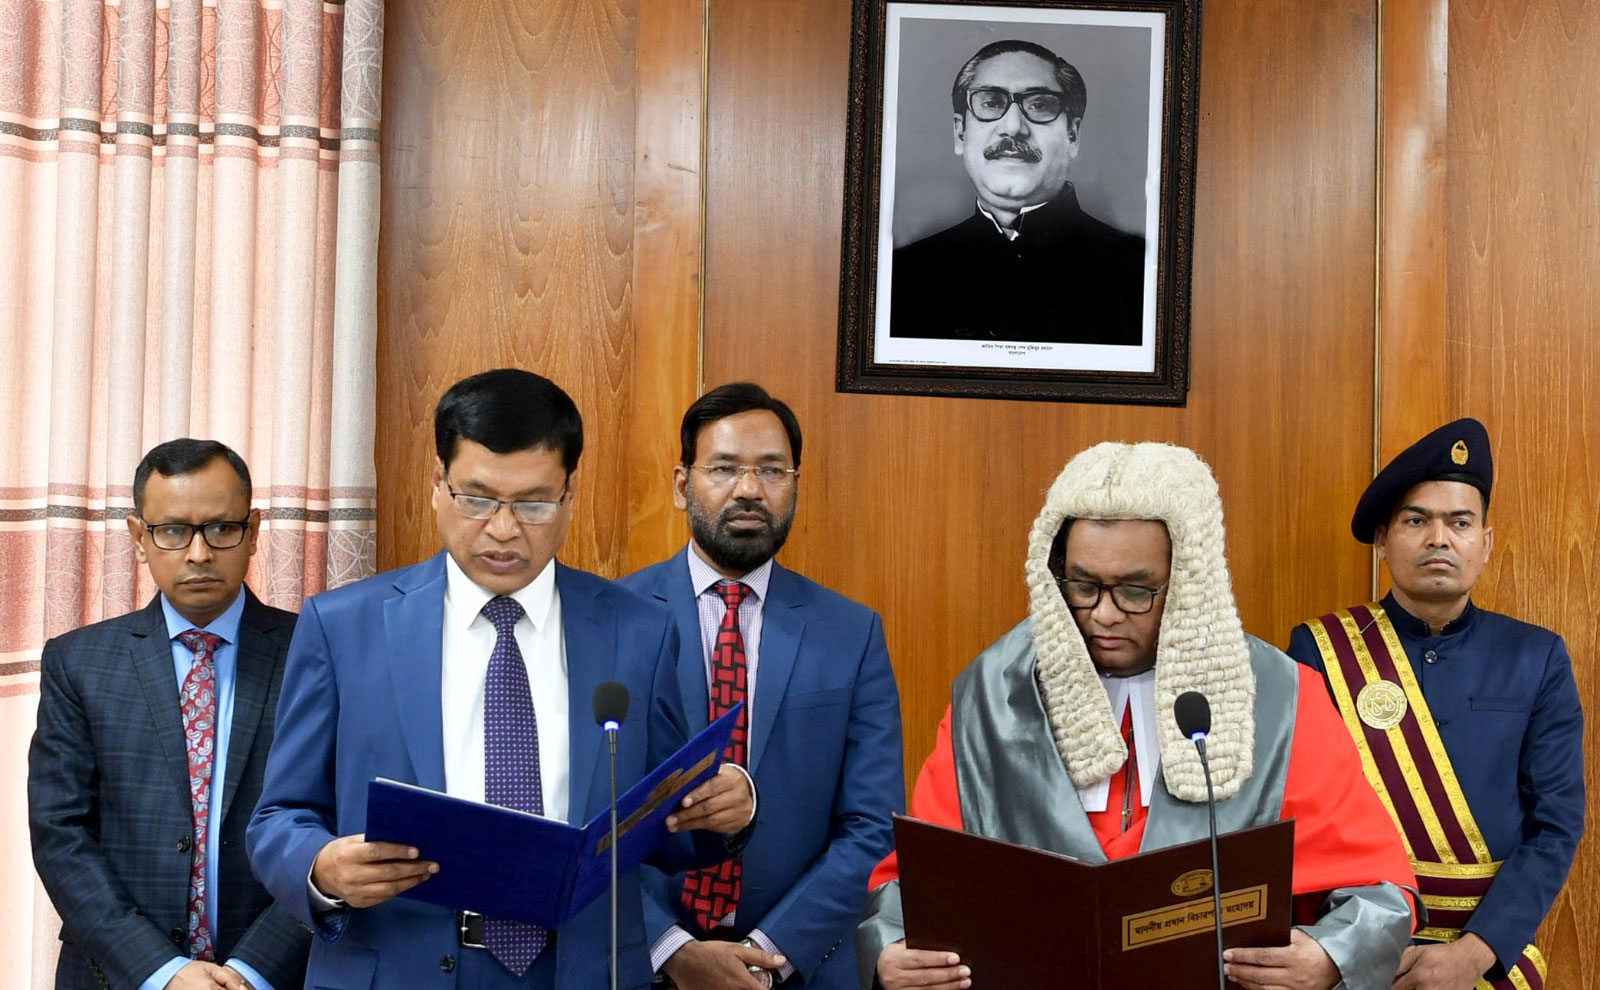 Swearing ceremony of the 13th Comptroller and Auditor General of Bangladesh.